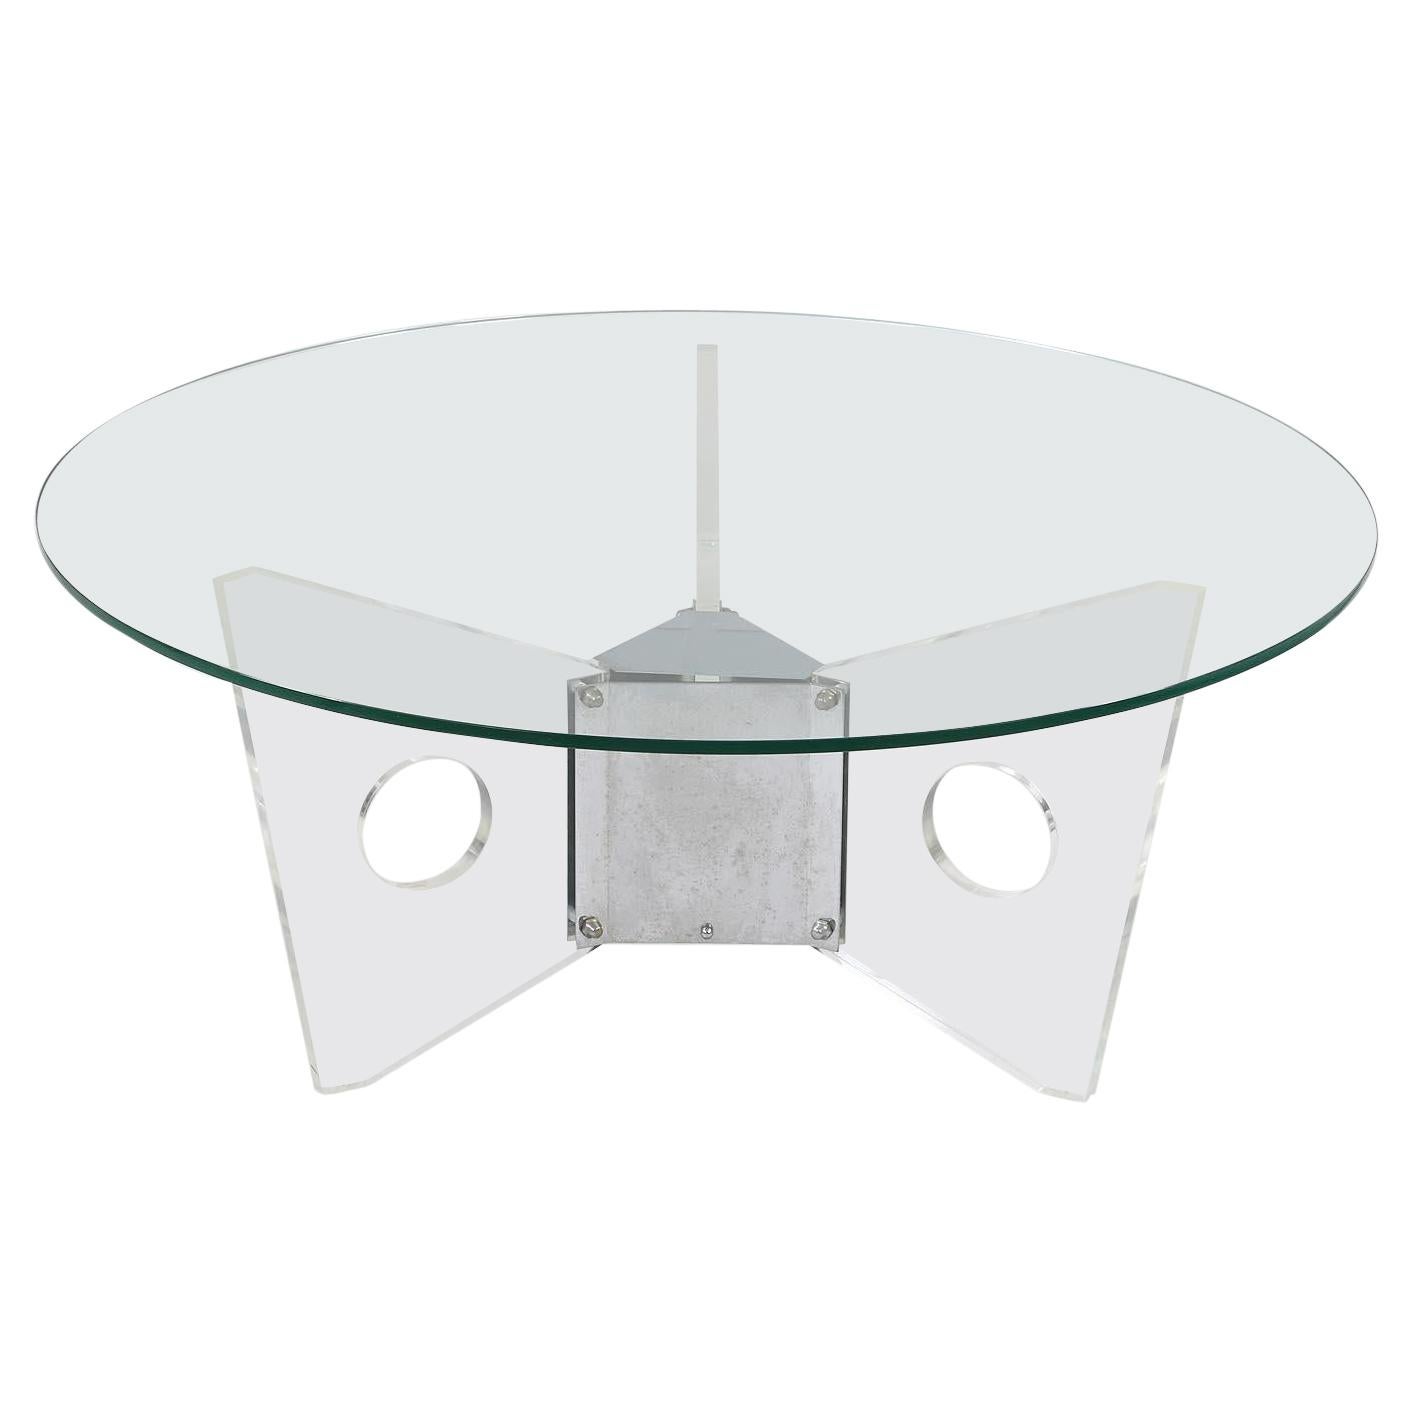 Wonderful Mid-Century Modern Round Glass Top Lucite & Chrome Base Coffee Table